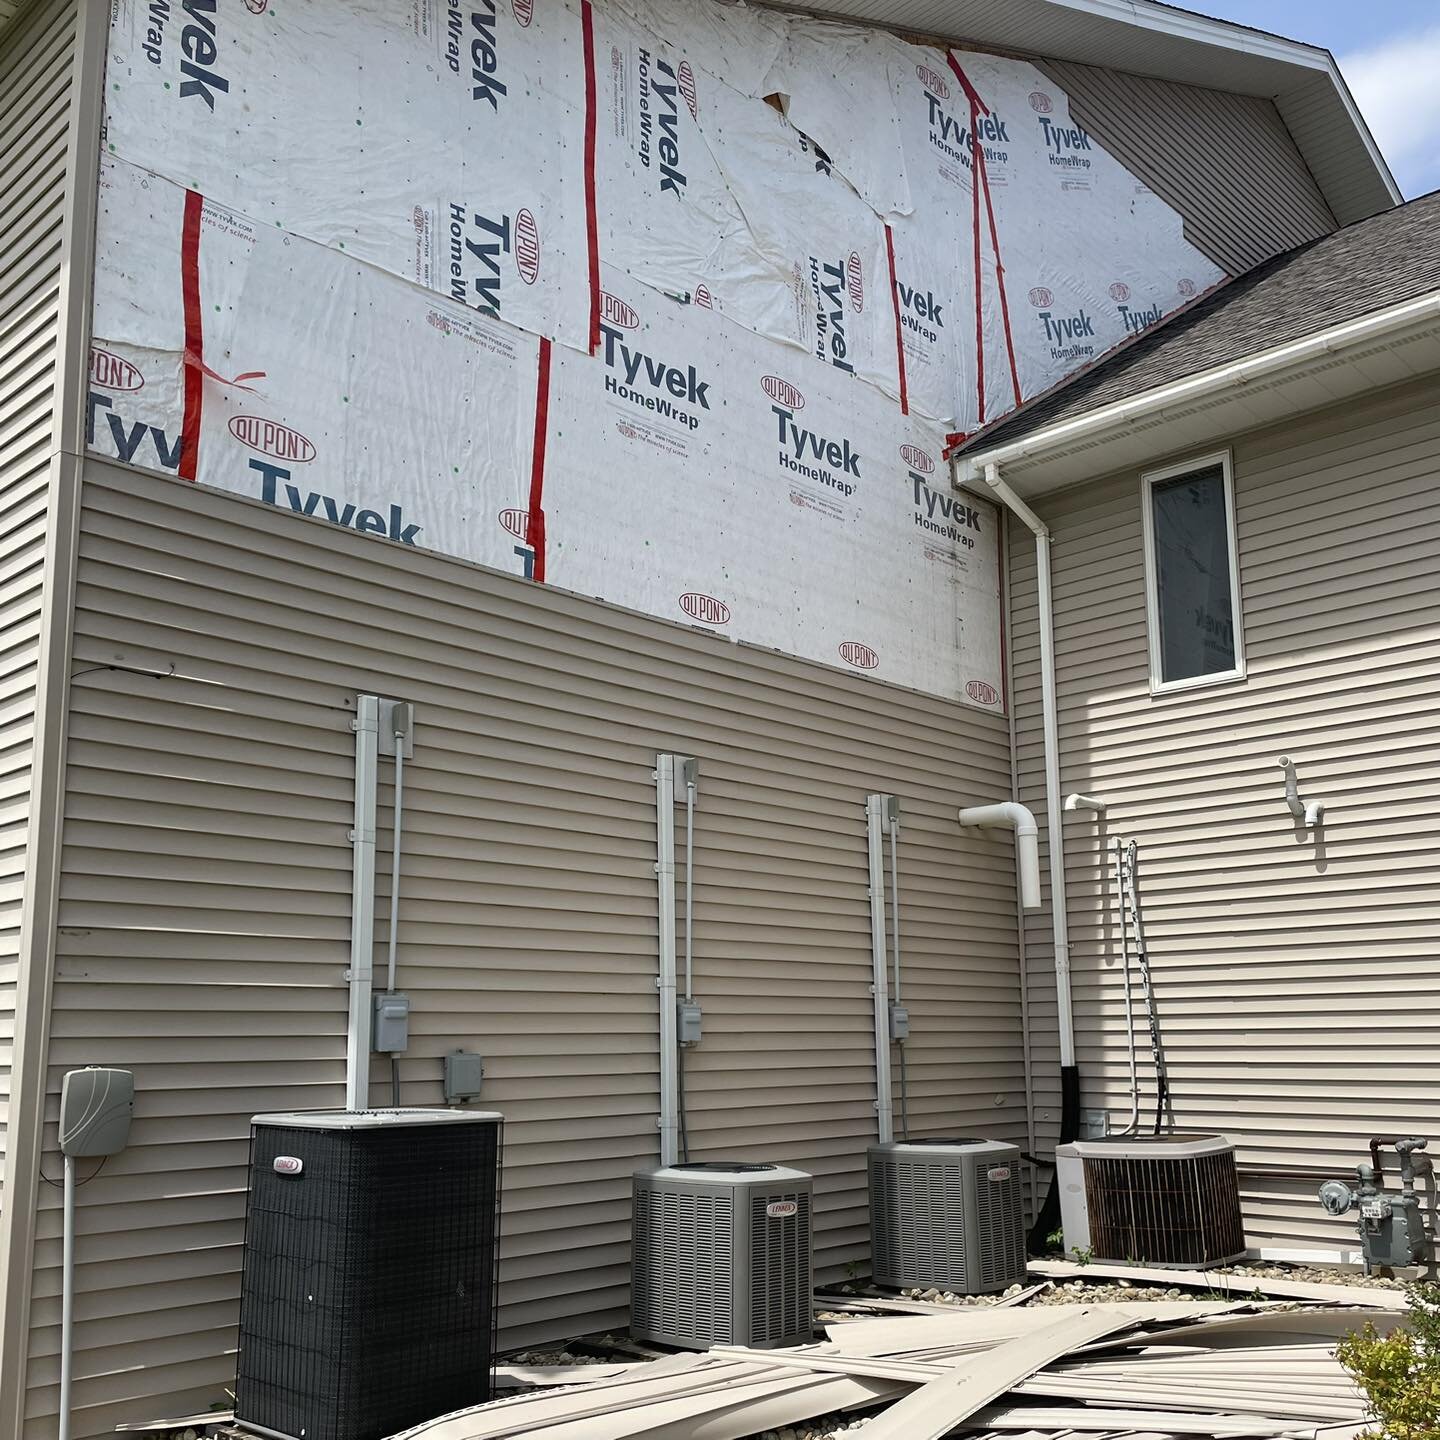 You&rsquo;ve probably noticed that the weather has played major havoc with our siding. That&rsquo;s a pretty big problem! Well don&rsquo;t worry because our deacons have been hard at work with the insurance company and a repair has been approved! But